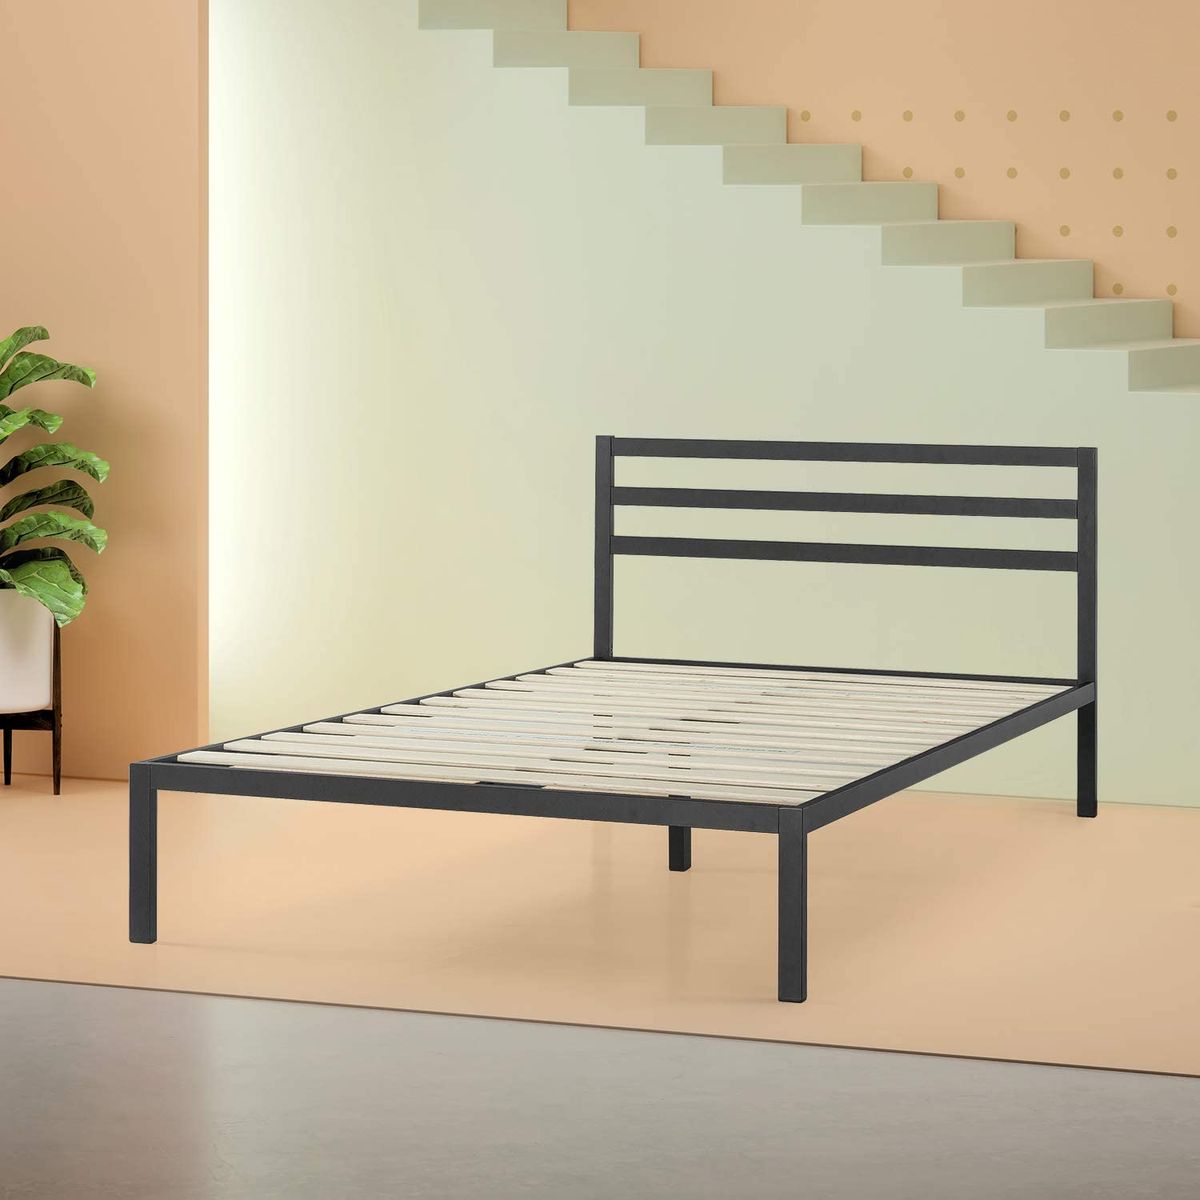 19 Best Metal Bed Frames 2020 The, Metal Bed Frame Without Footboard